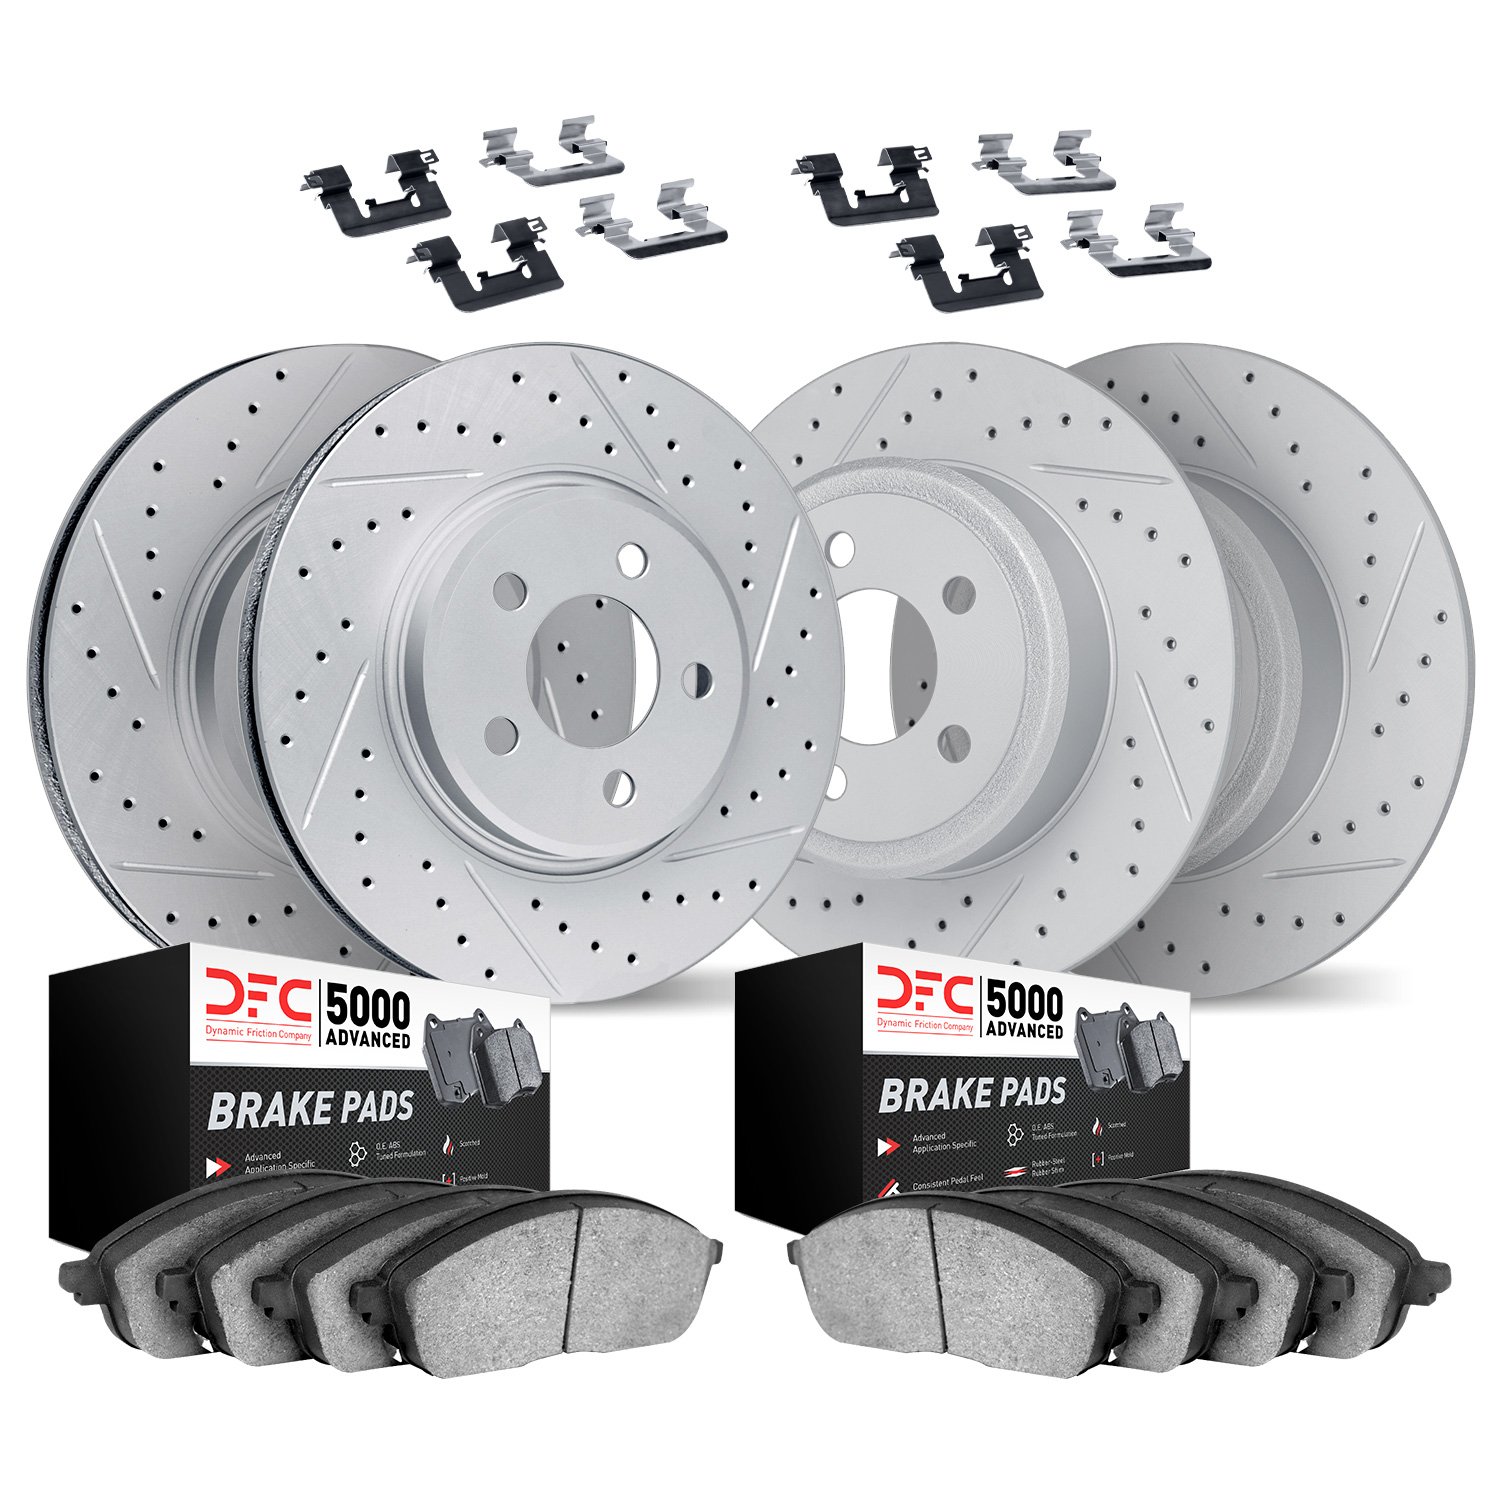 2514-59086 Geoperformance Drilled/Slotted Rotors w/5000 Advanced Brake Pads Kit & Hardware, 2017-2019 Acura/Honda, Position: Fro